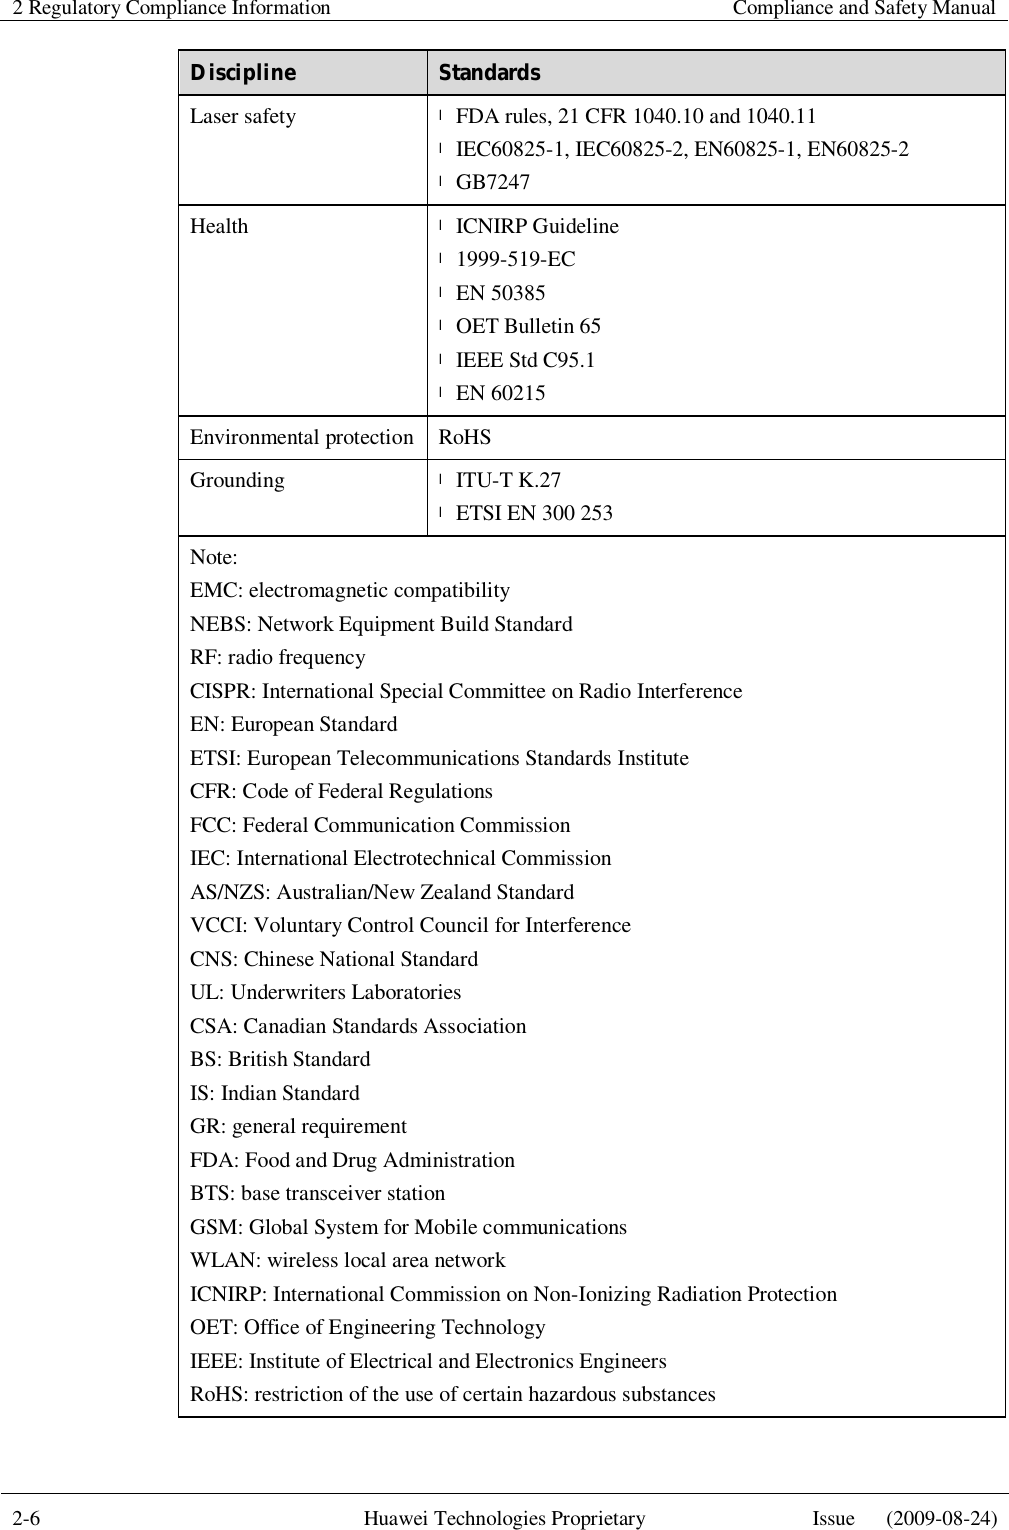 2 Regulatory Compliance Information    Compliance and Safety Manual  2-6  Huawei Technologies Proprietary  Issue   (2009-08-24)  Discipline  Standards Laser safety  l FDA rules, 21 CFR 1040.10 and 1040.11 l IEC60825-1, IEC60825-2, EN60825-1, EN60825-2 l GB7247 Health  l ICNIRP Guideline l 1999-519-EC l EN 50385 l OET Bulletin 65 l IEEE Std C95.1 l EN 60215 Environmental protection RoHS Grounding  l ITU-T K.27 l ETSI EN 300 253 Note: EMC: electromagnetic compatibility NEBS: Network Equipment Build Standard RF: radio frequency CISPR: International Special Committee on Radio Interference EN: European Standard ETSI: European Telecommunications Standards Institute CFR: Code of Federal Regulations FCC: Federal Communication Commission IEC: International Electrotechnical Commission AS/NZS: Australian/New Zealand Standard VCCI: Voluntary Control Council for Interference CNS: Chinese National Standard UL: Underwriters Laboratories CSA: Canadian Standards Association BS: British Standard IS: Indian Standard GR: general requirement FDA: Food and Drug Administration BTS: base transceiver station GSM: Global System for Mobile communications WLAN: wireless local area network ICNIRP: International Commission on Non-Ionizing Radiation Protection OET: Office of Engineering Technology IEEE: Institute of Electrical and Electronics Engineers RoHS: restriction of the use of certain hazardous substances 